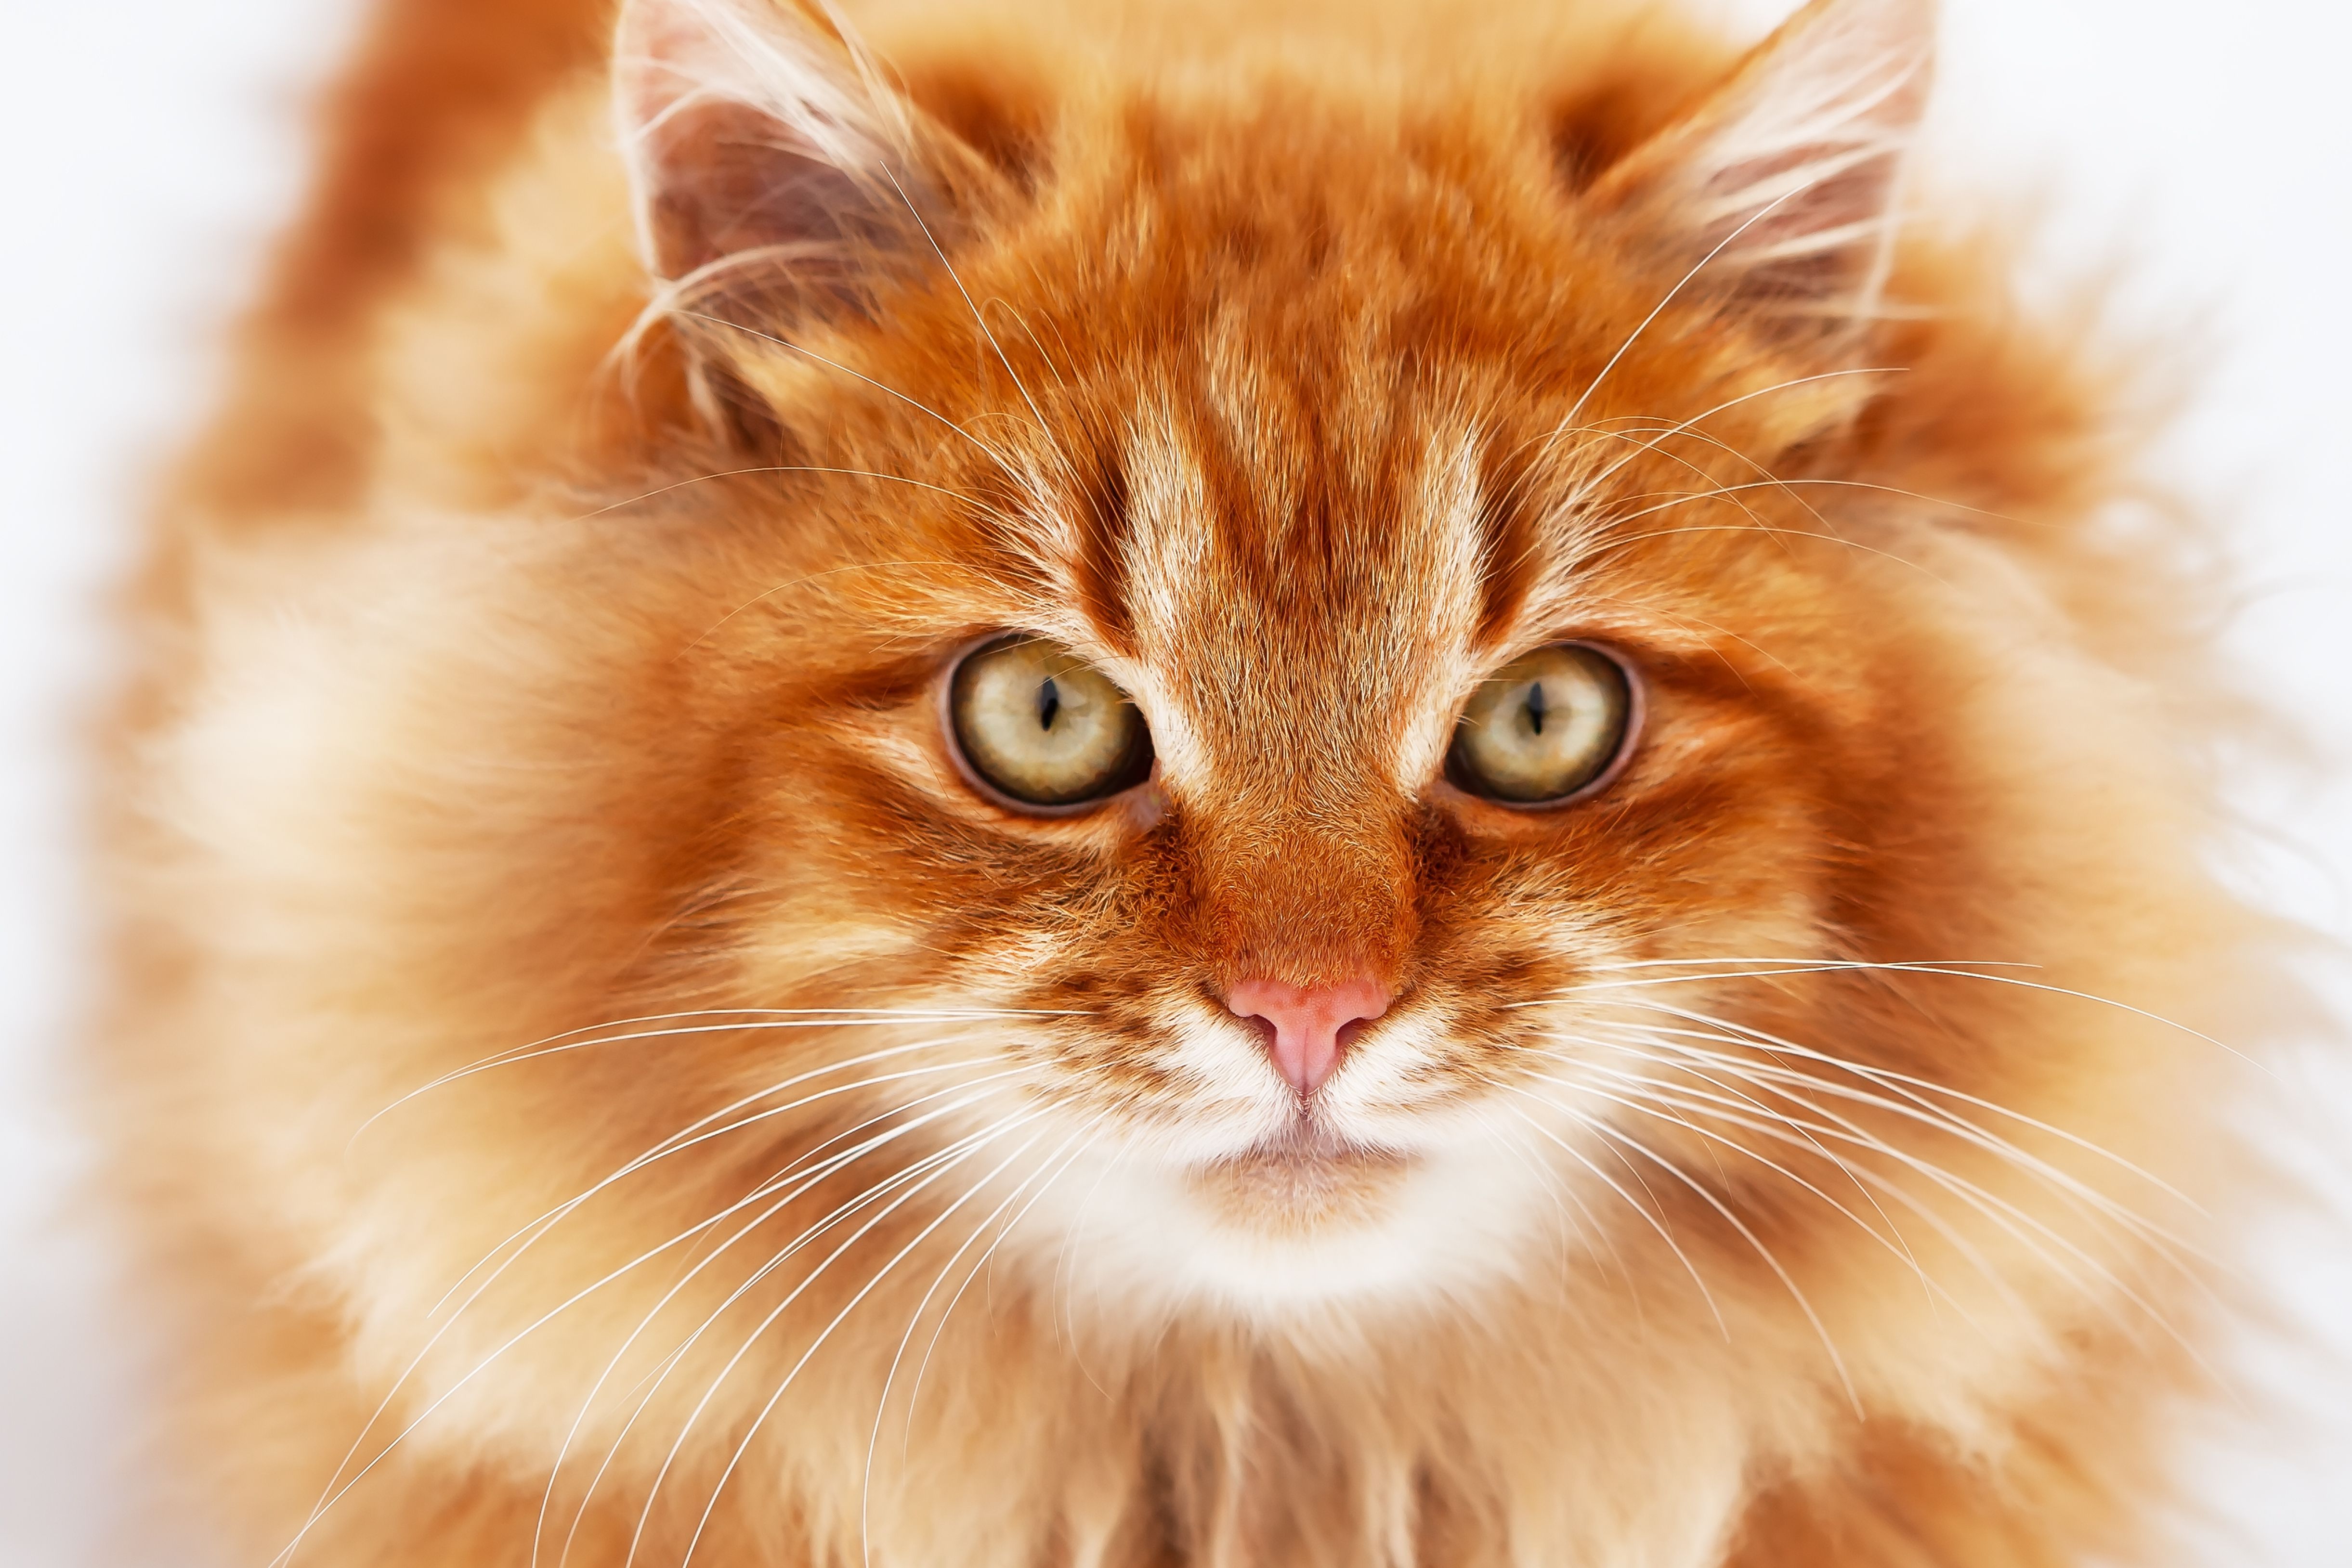 portrait-of-a-red-fluffy-cat-with-big-eyes-in-royalty-free-image-1701455126.jpg